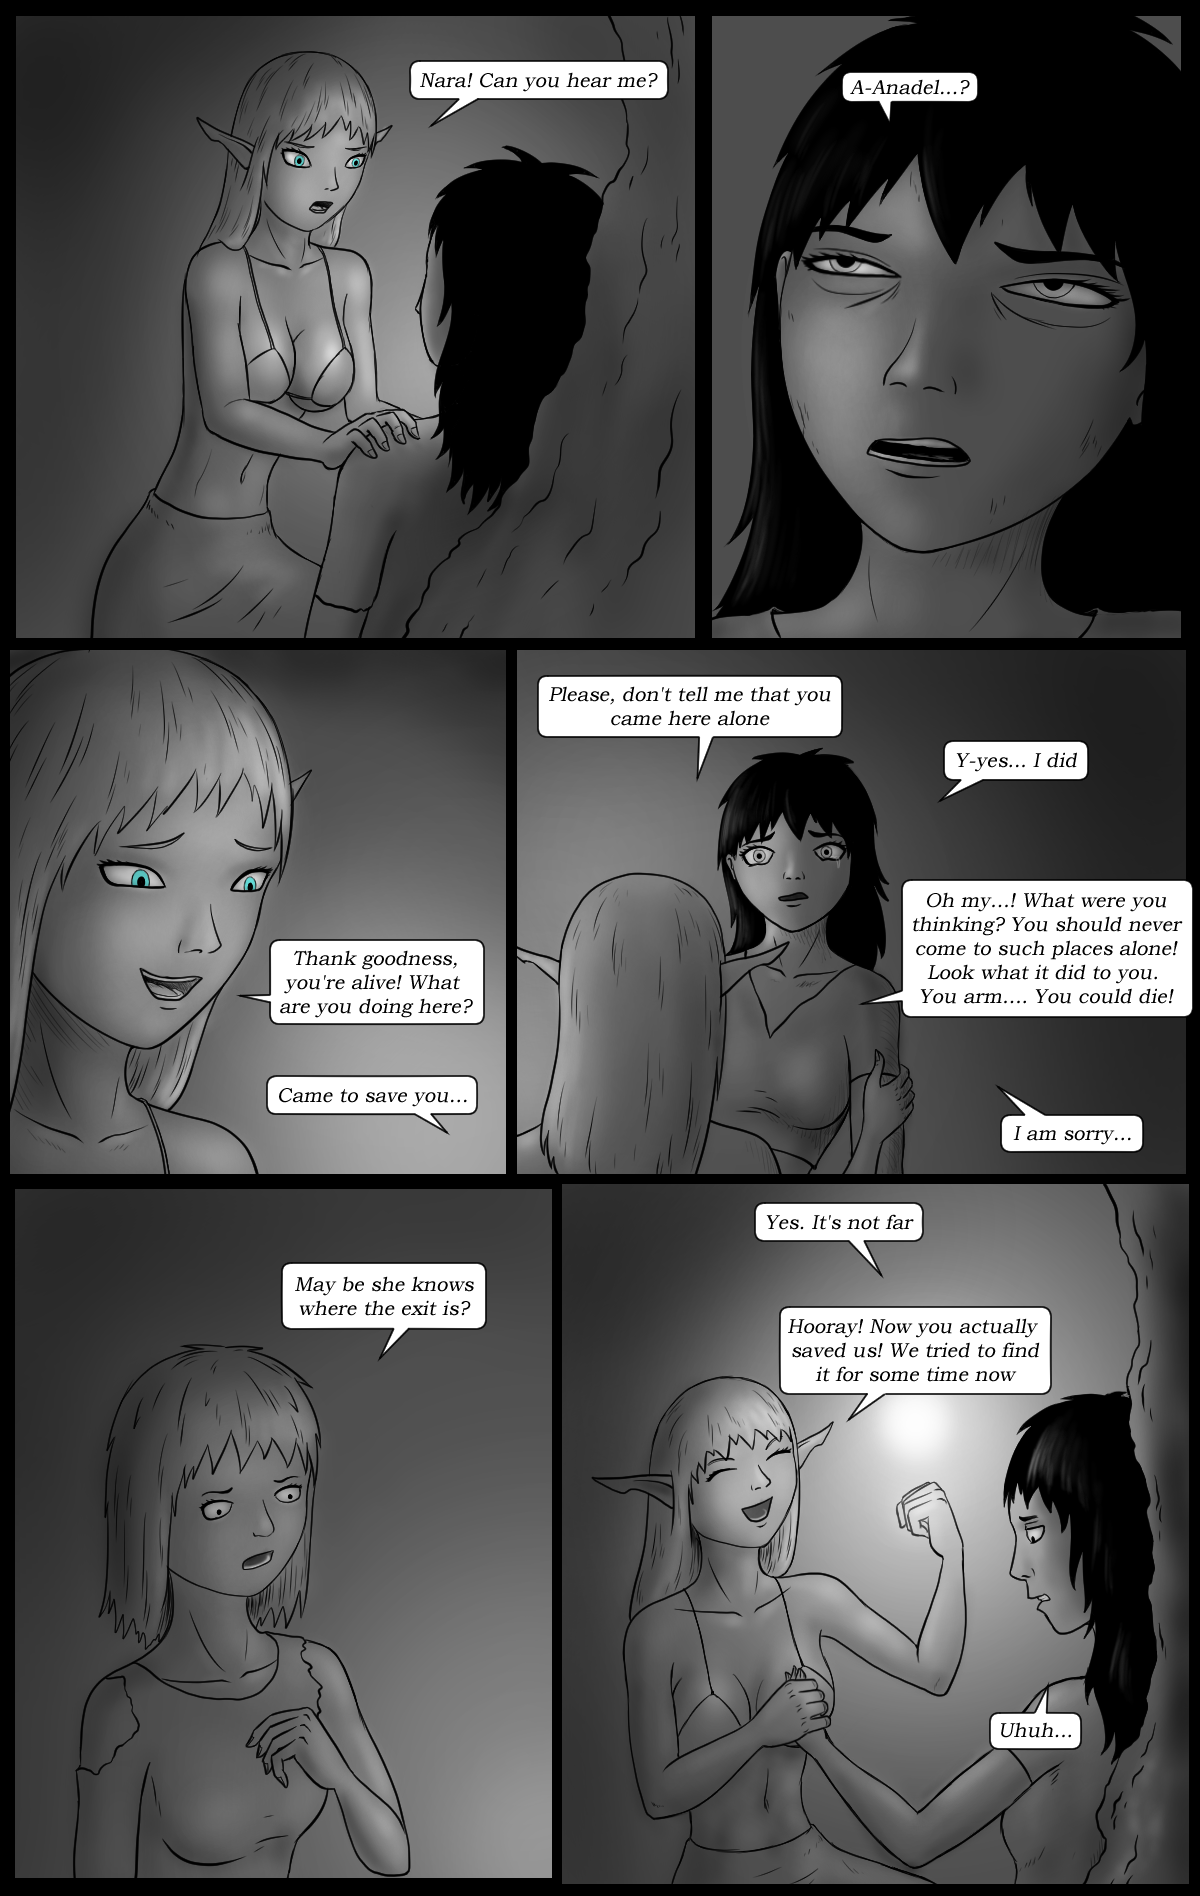 Page 75 - She came alone